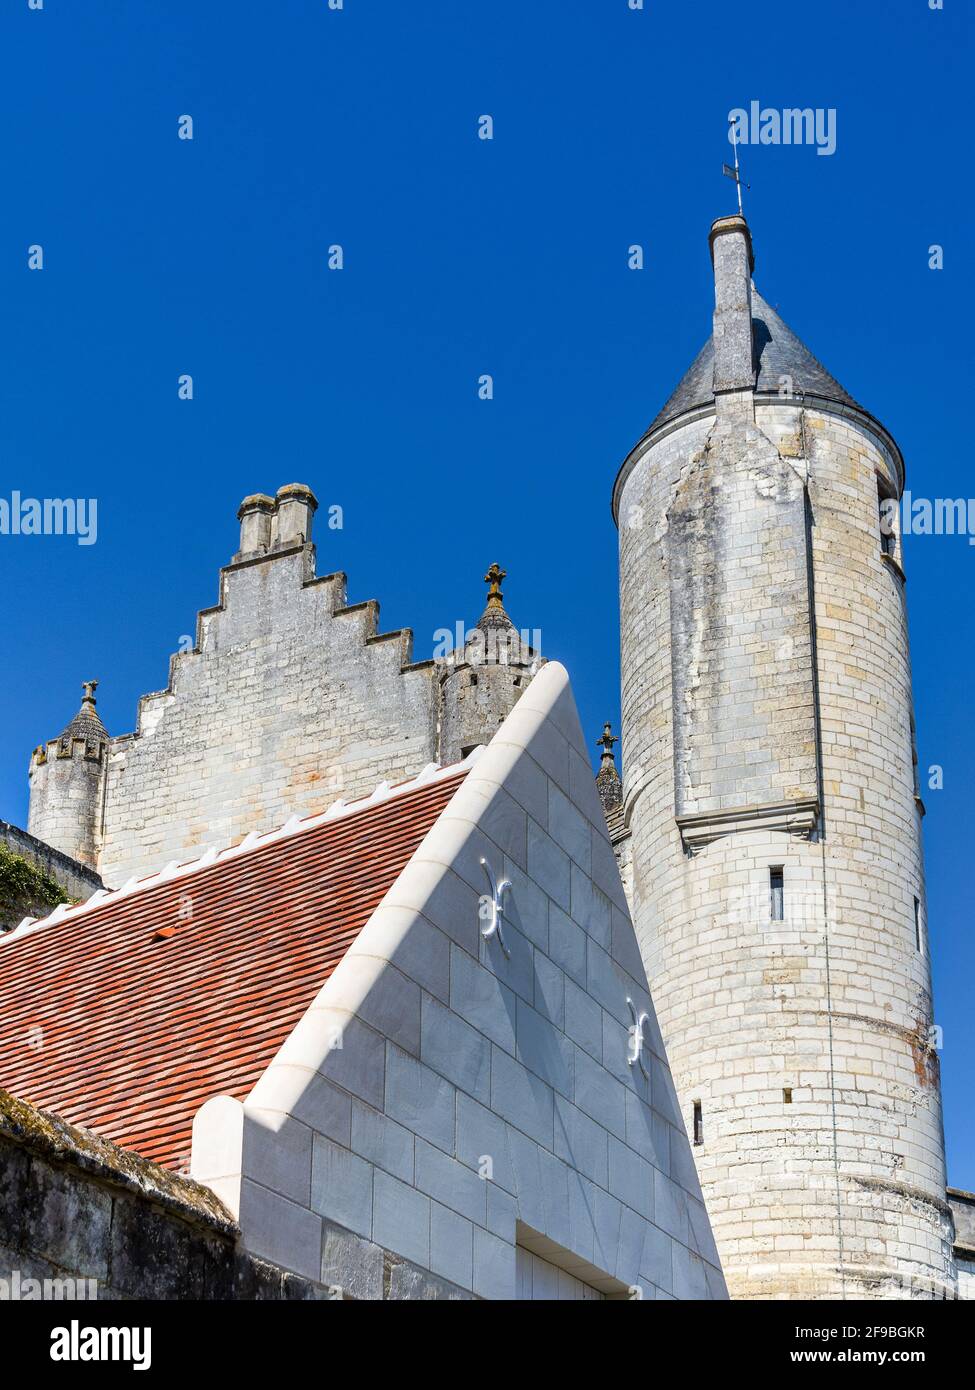 Re-roofed domestic property next to the Royal Chateau in Loches, Indre-et-Loire, France. Stock Photo